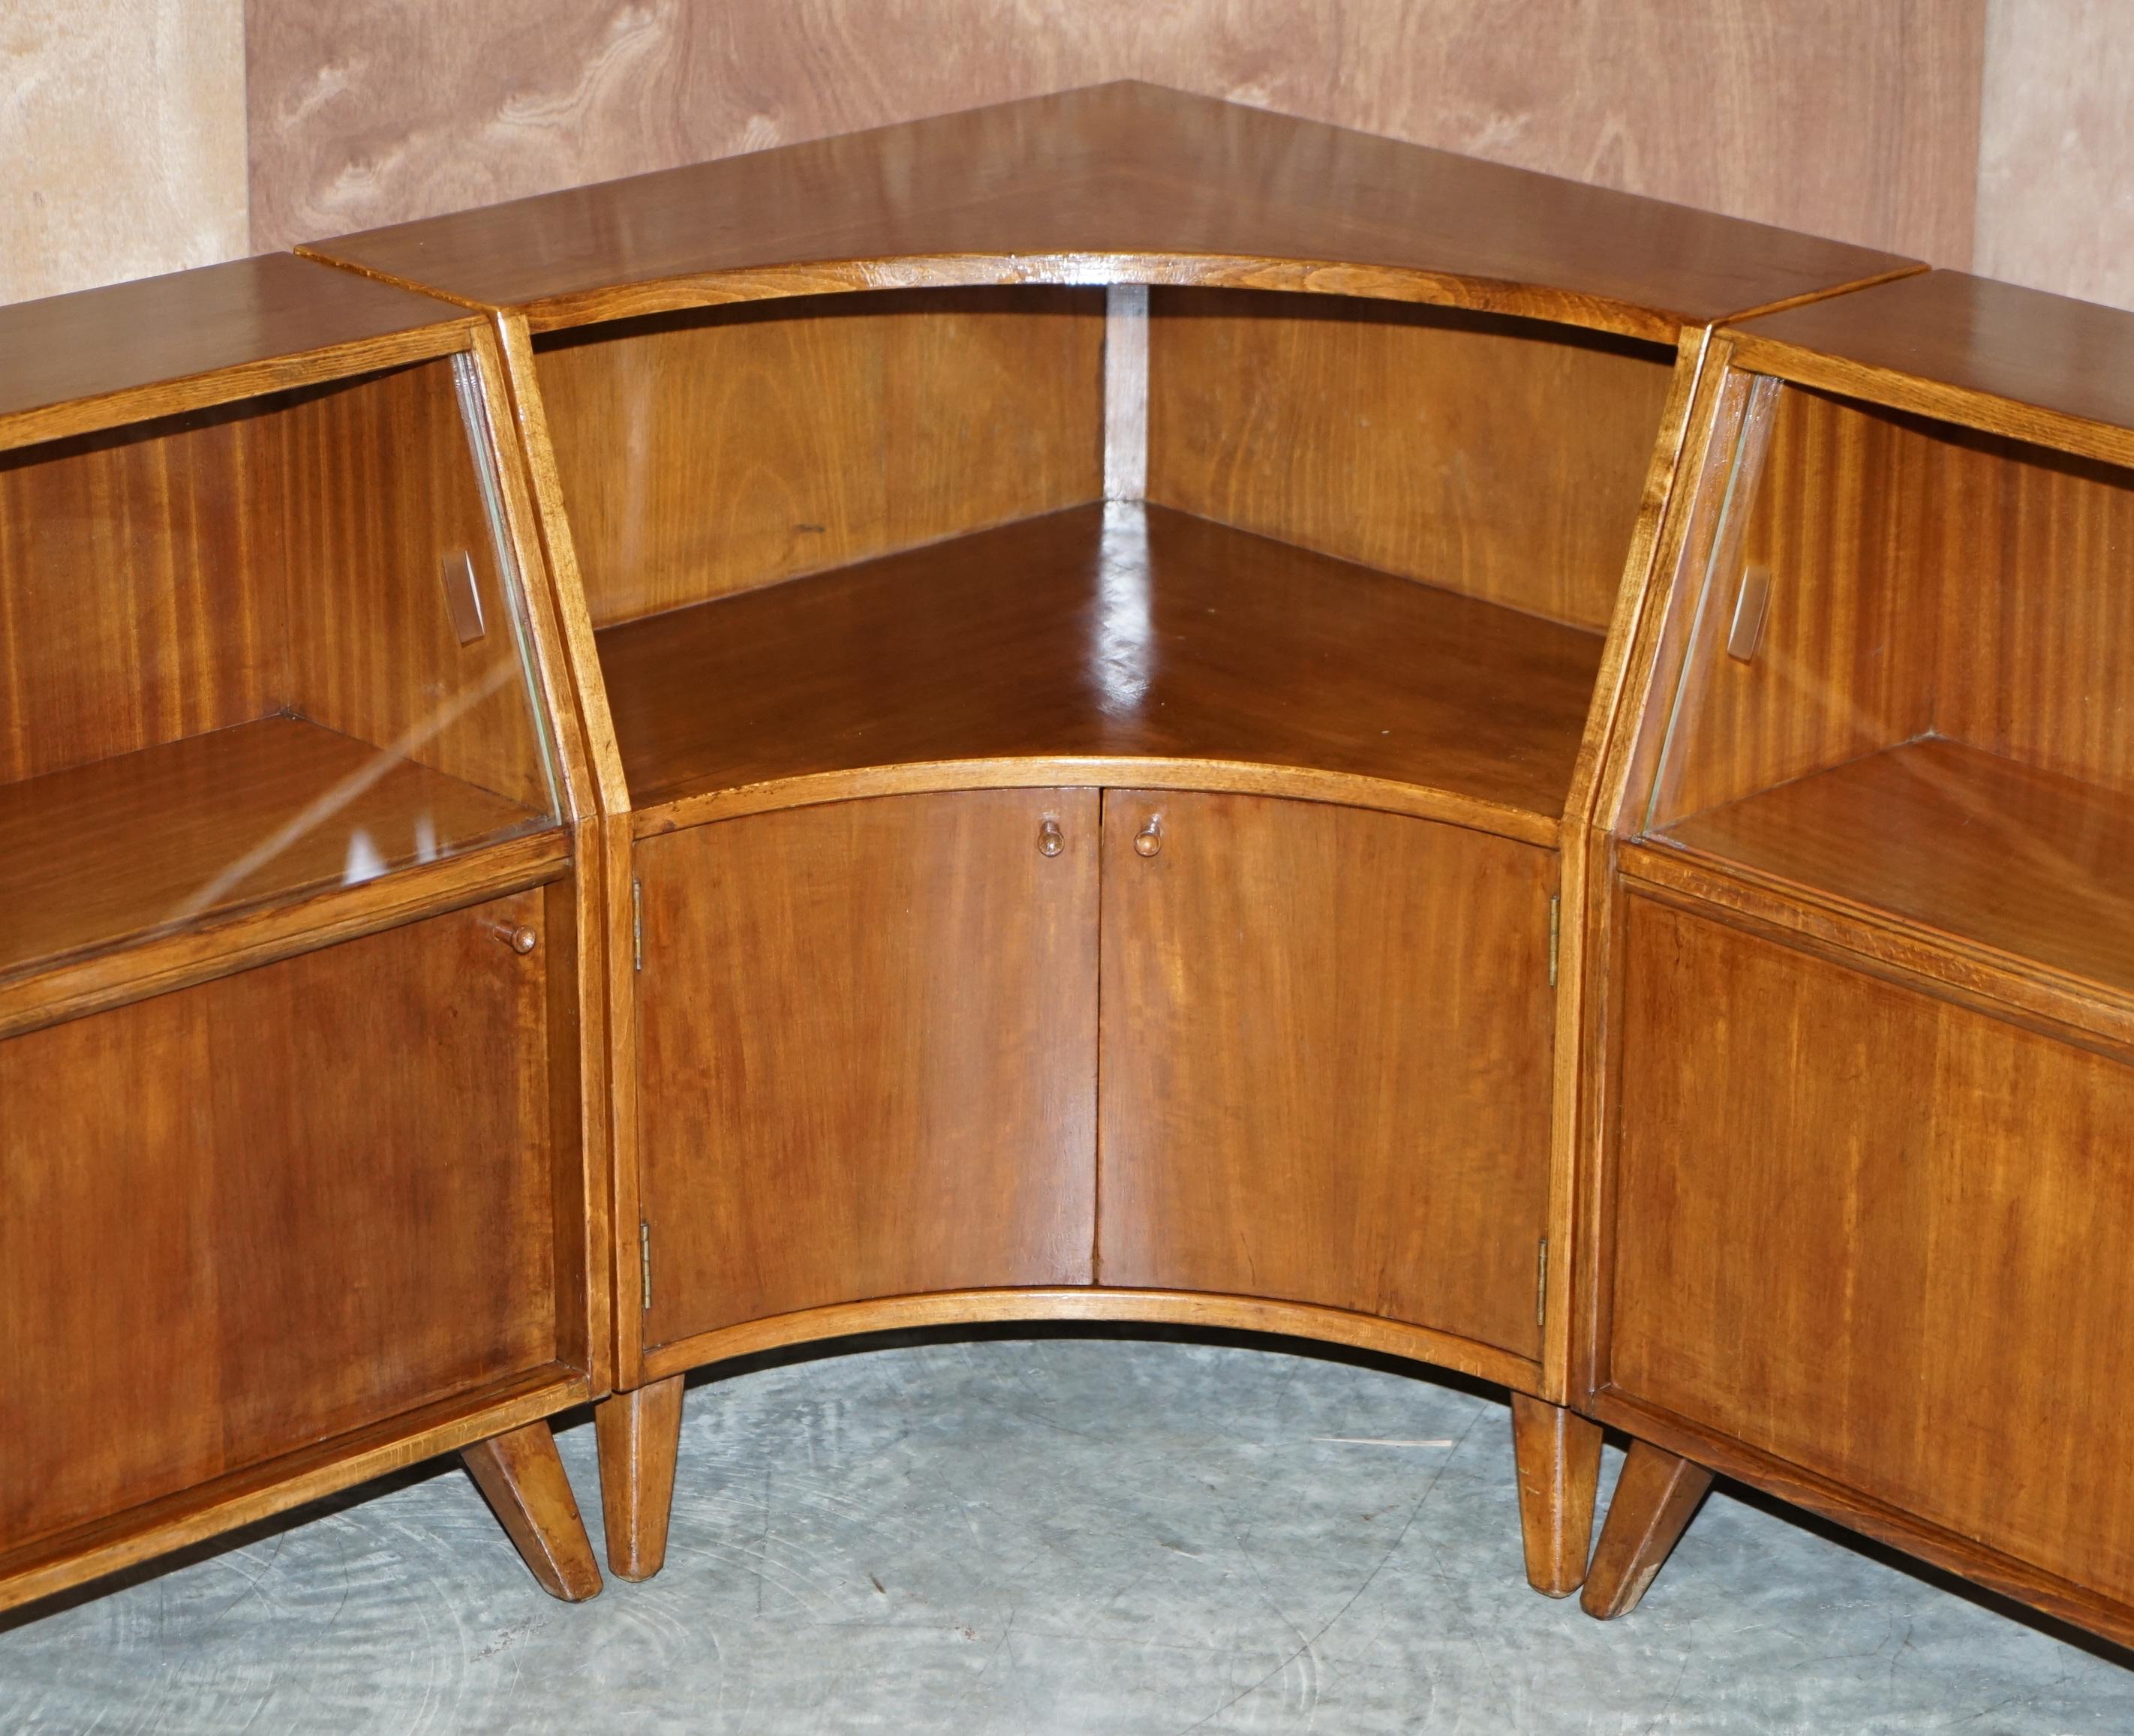 We are delighted to offer for this lovely lightly mahogany with glass sliding doors Greaves & Thomas Put-U-Up modular sideboard

A very charming and finely made suite of Mid-Century Modern sideboards. These are modular as mentioned so you can use